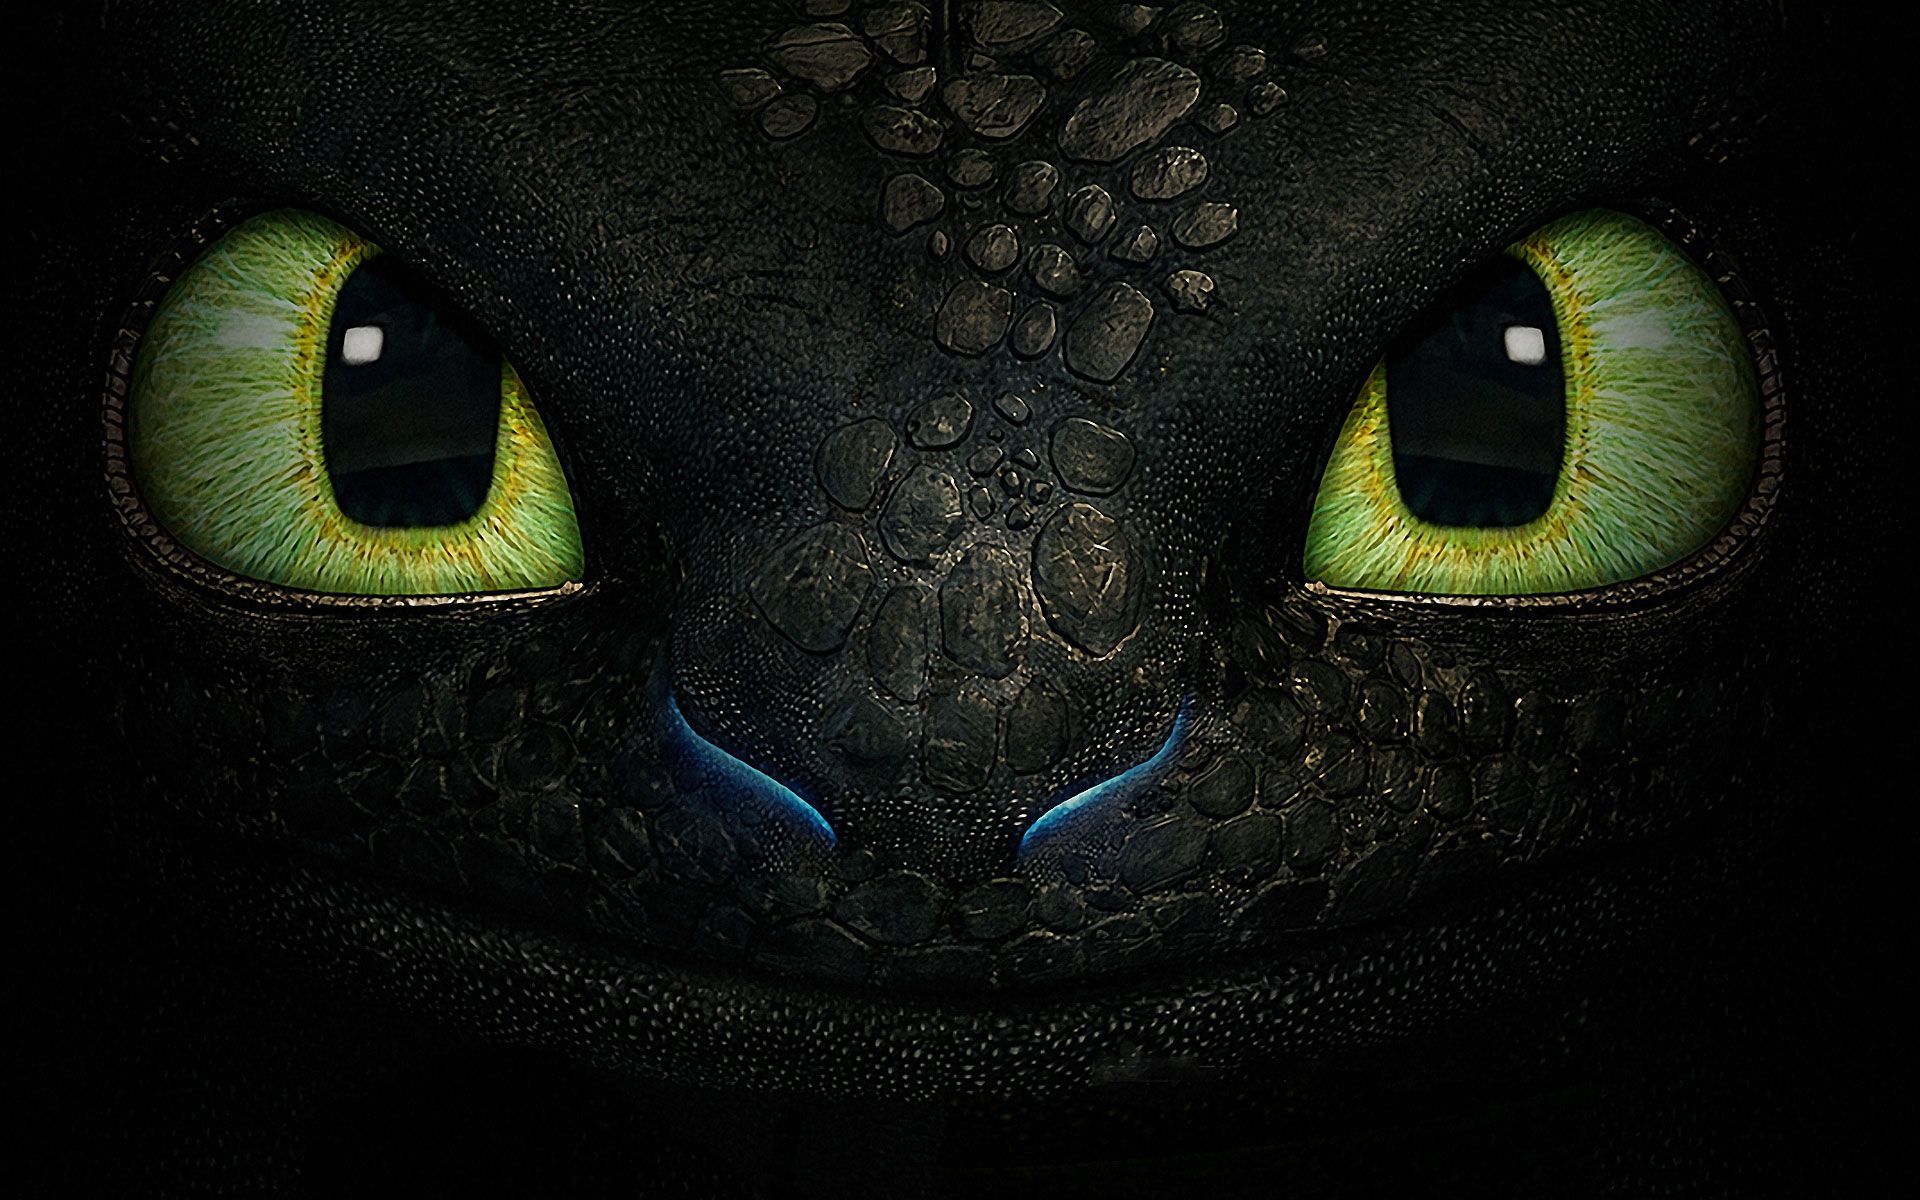 How-to-Train-Your-Dragon-2-toothless-wallpaper-hd1.jpg